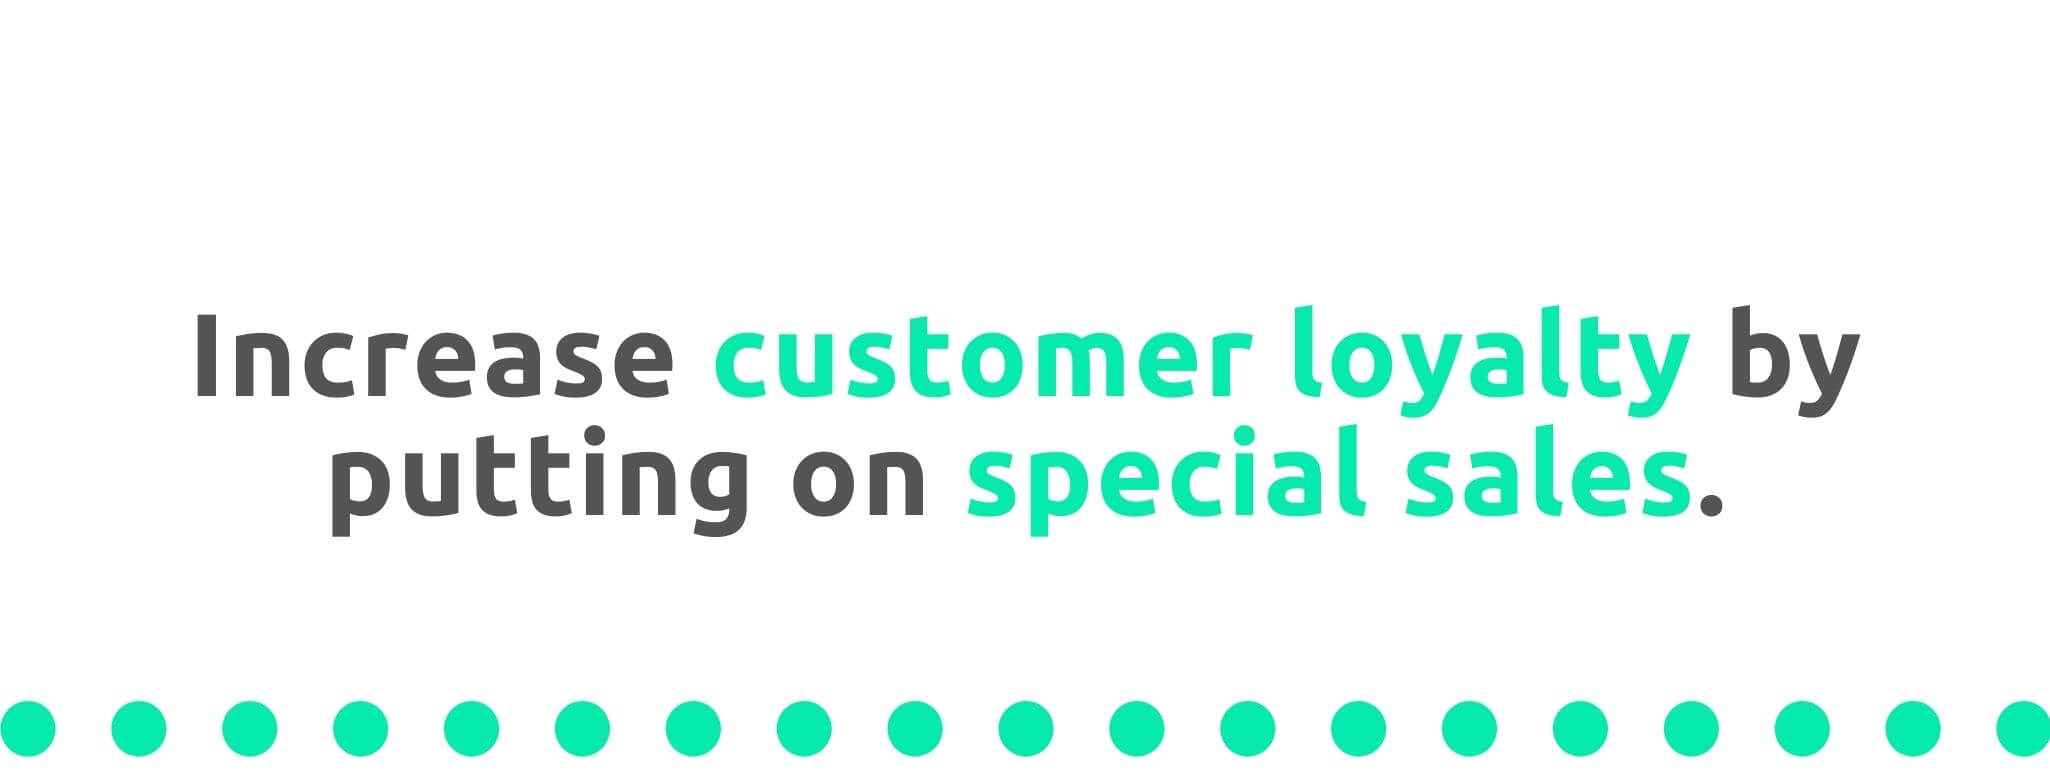 Increase customer loyalty by putting on sales - 21 Ways to Encourage Customer Loyalty - Replyco